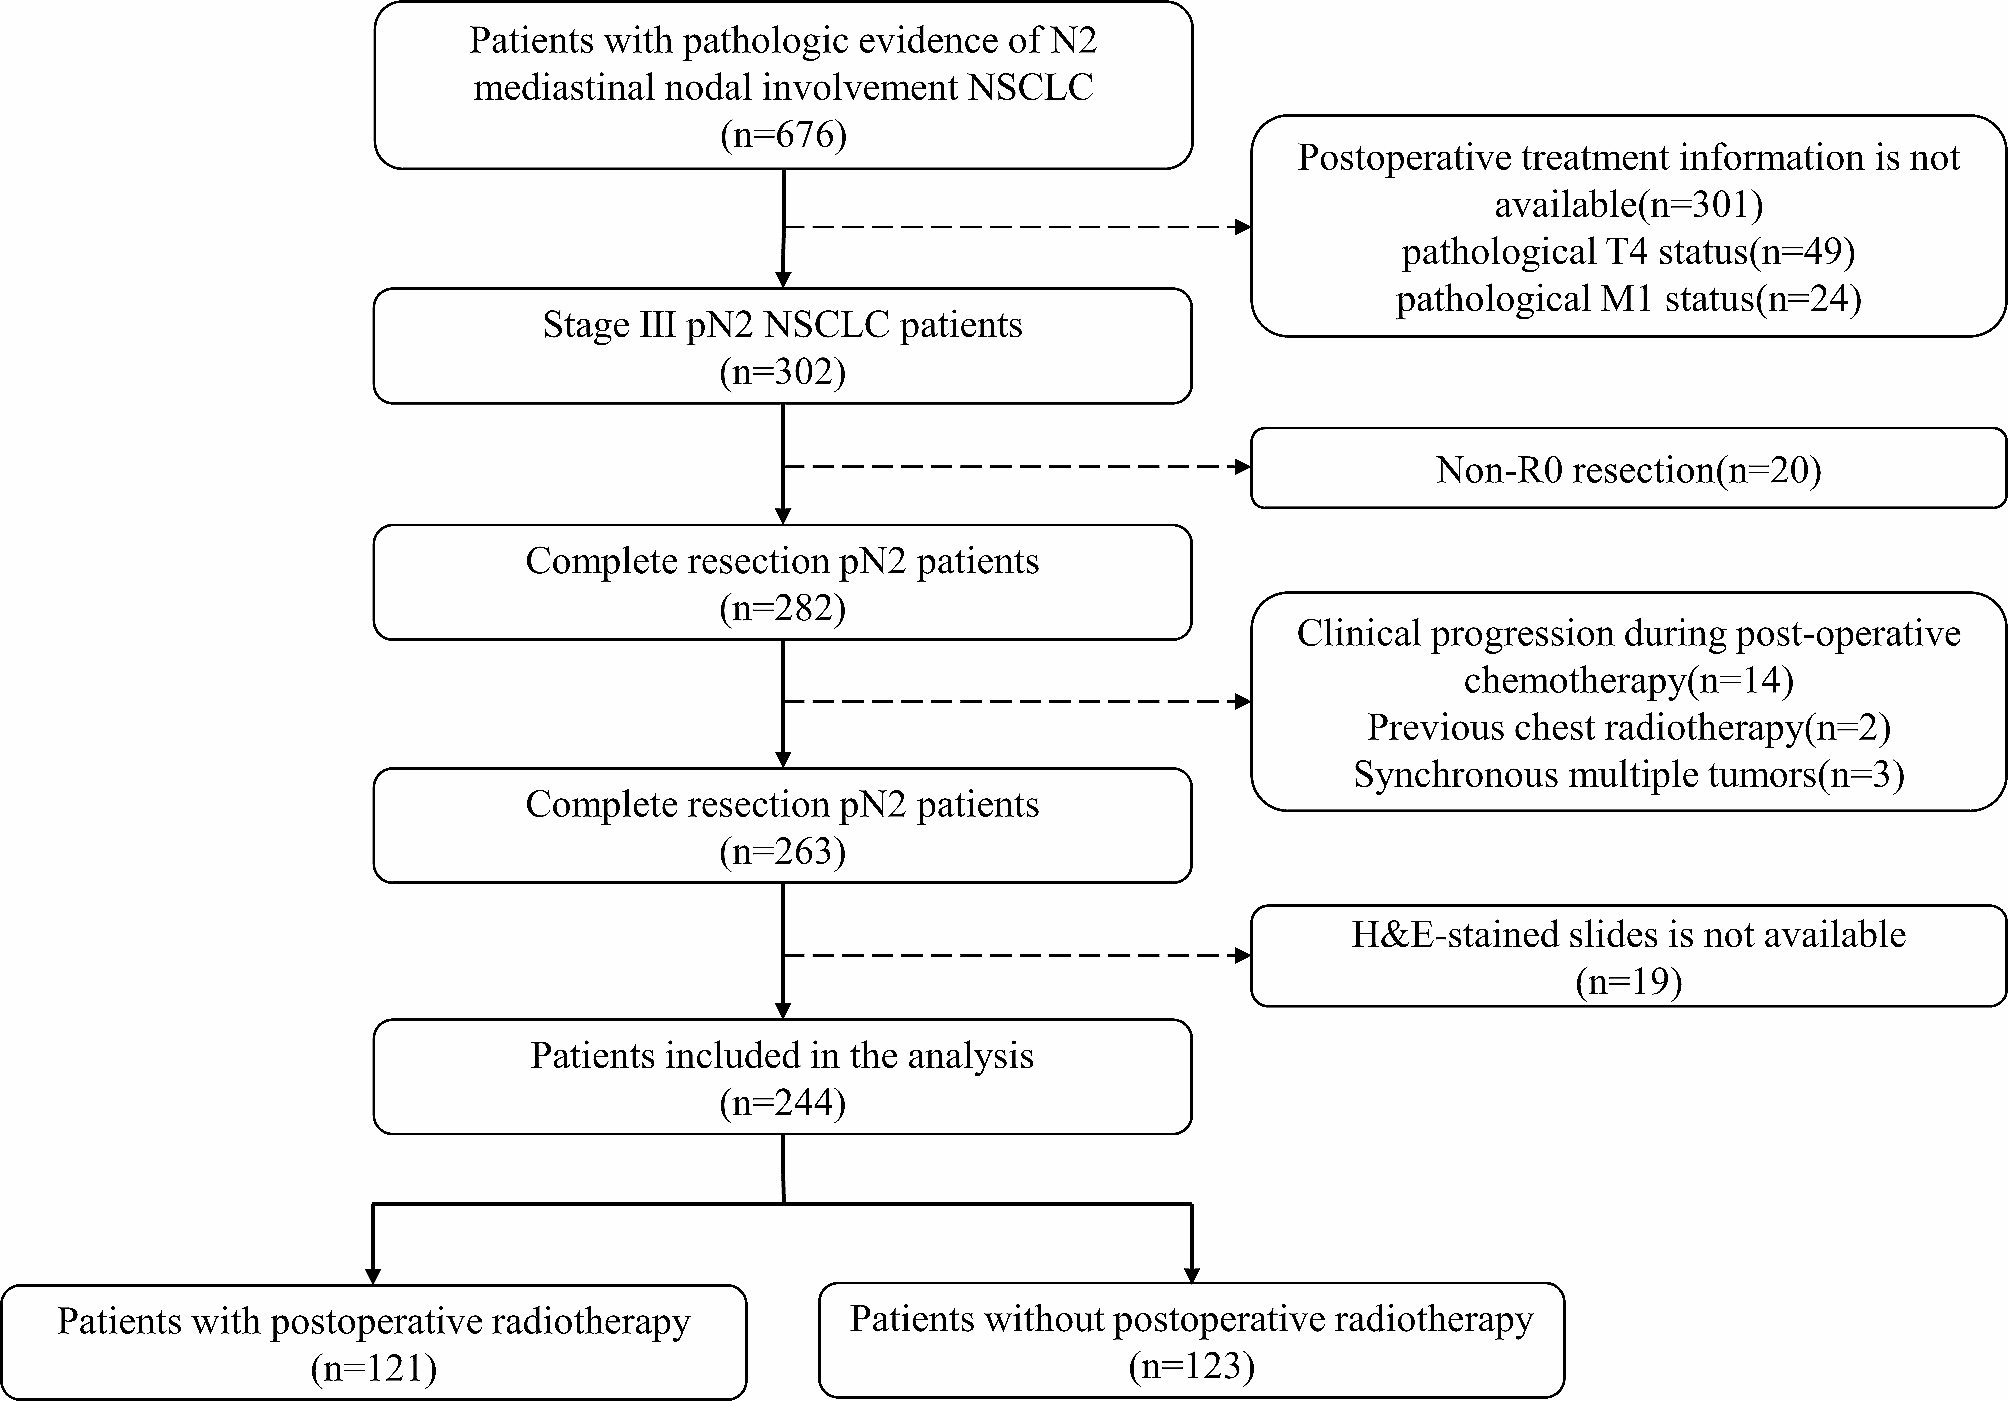 Prognostic biomarker tumor-infiltrating lymphocytes failed to serve as a predictive biomarker for postoperative radiotherapy in completely resected pN2 non-small cell lung cancer: a retrospective analysis